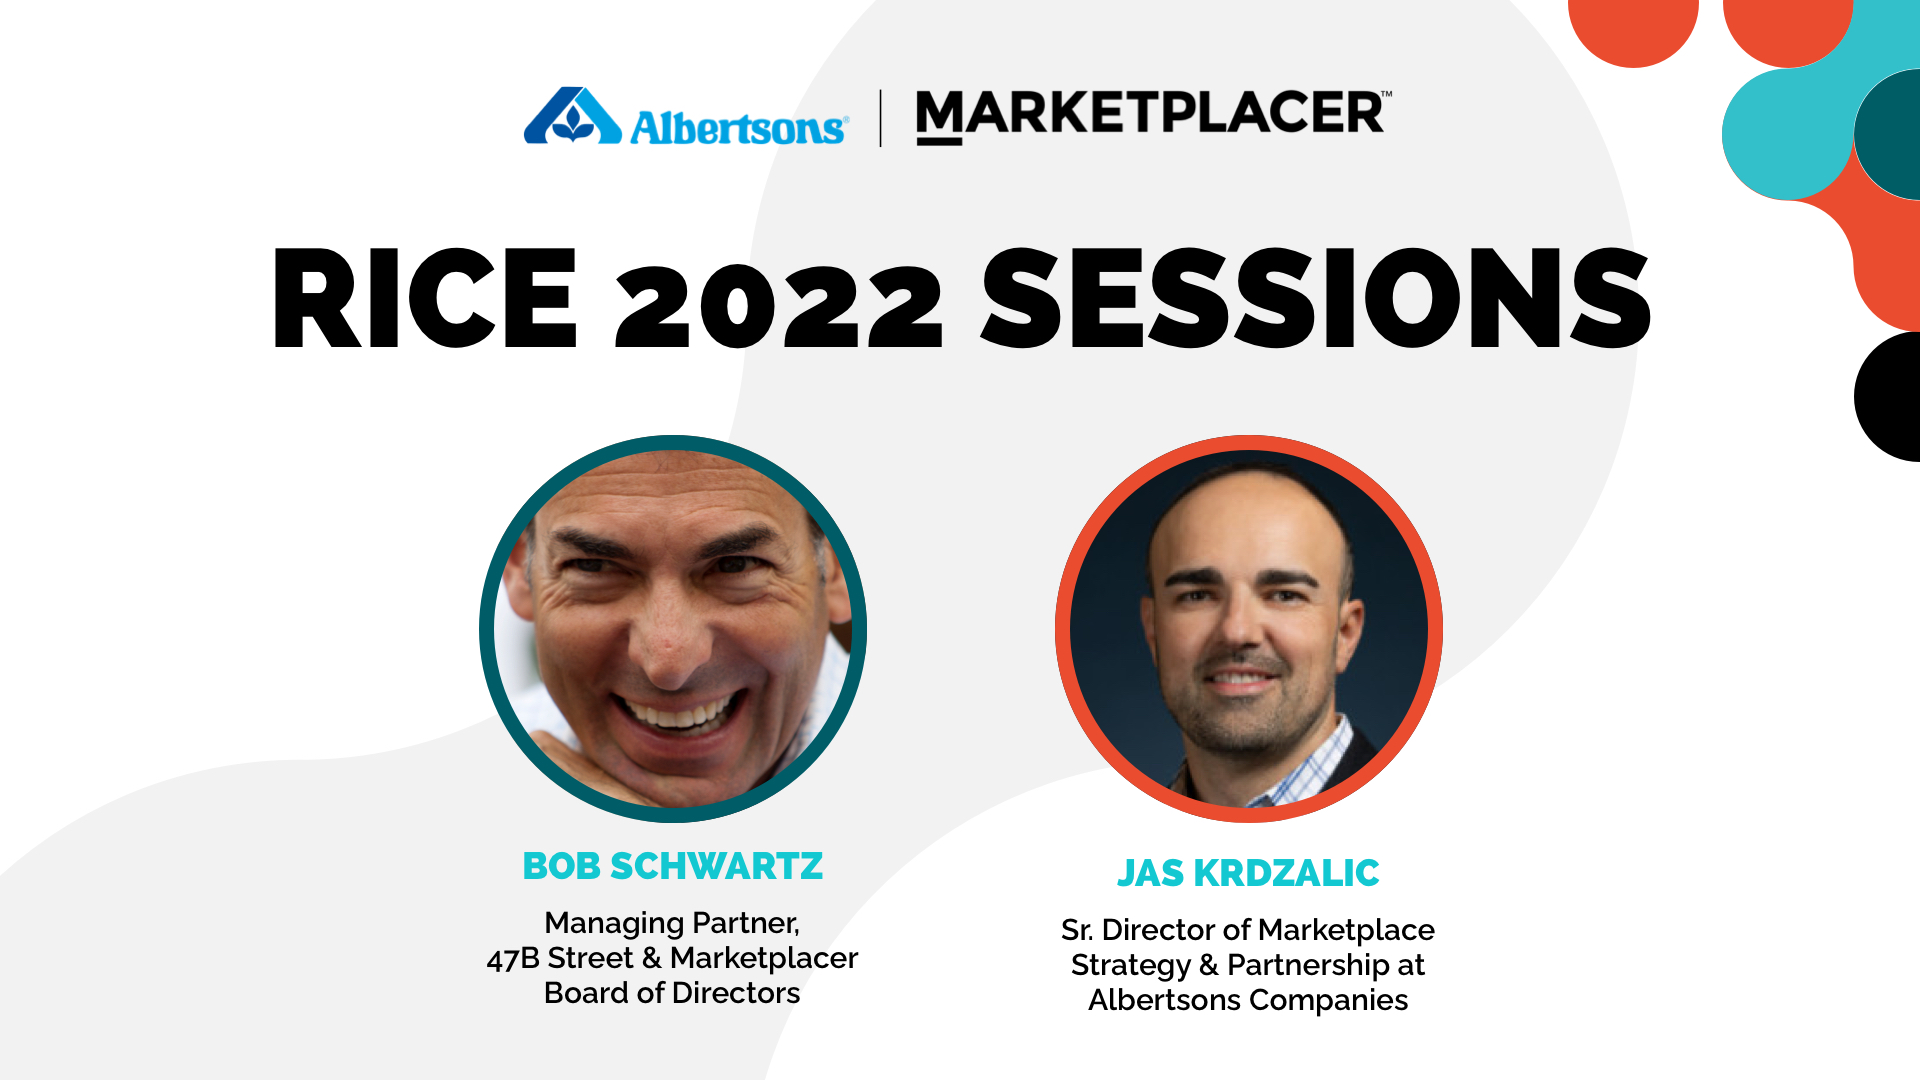 The State of Marketplaces Mass, Niche and International Growth Opportunities